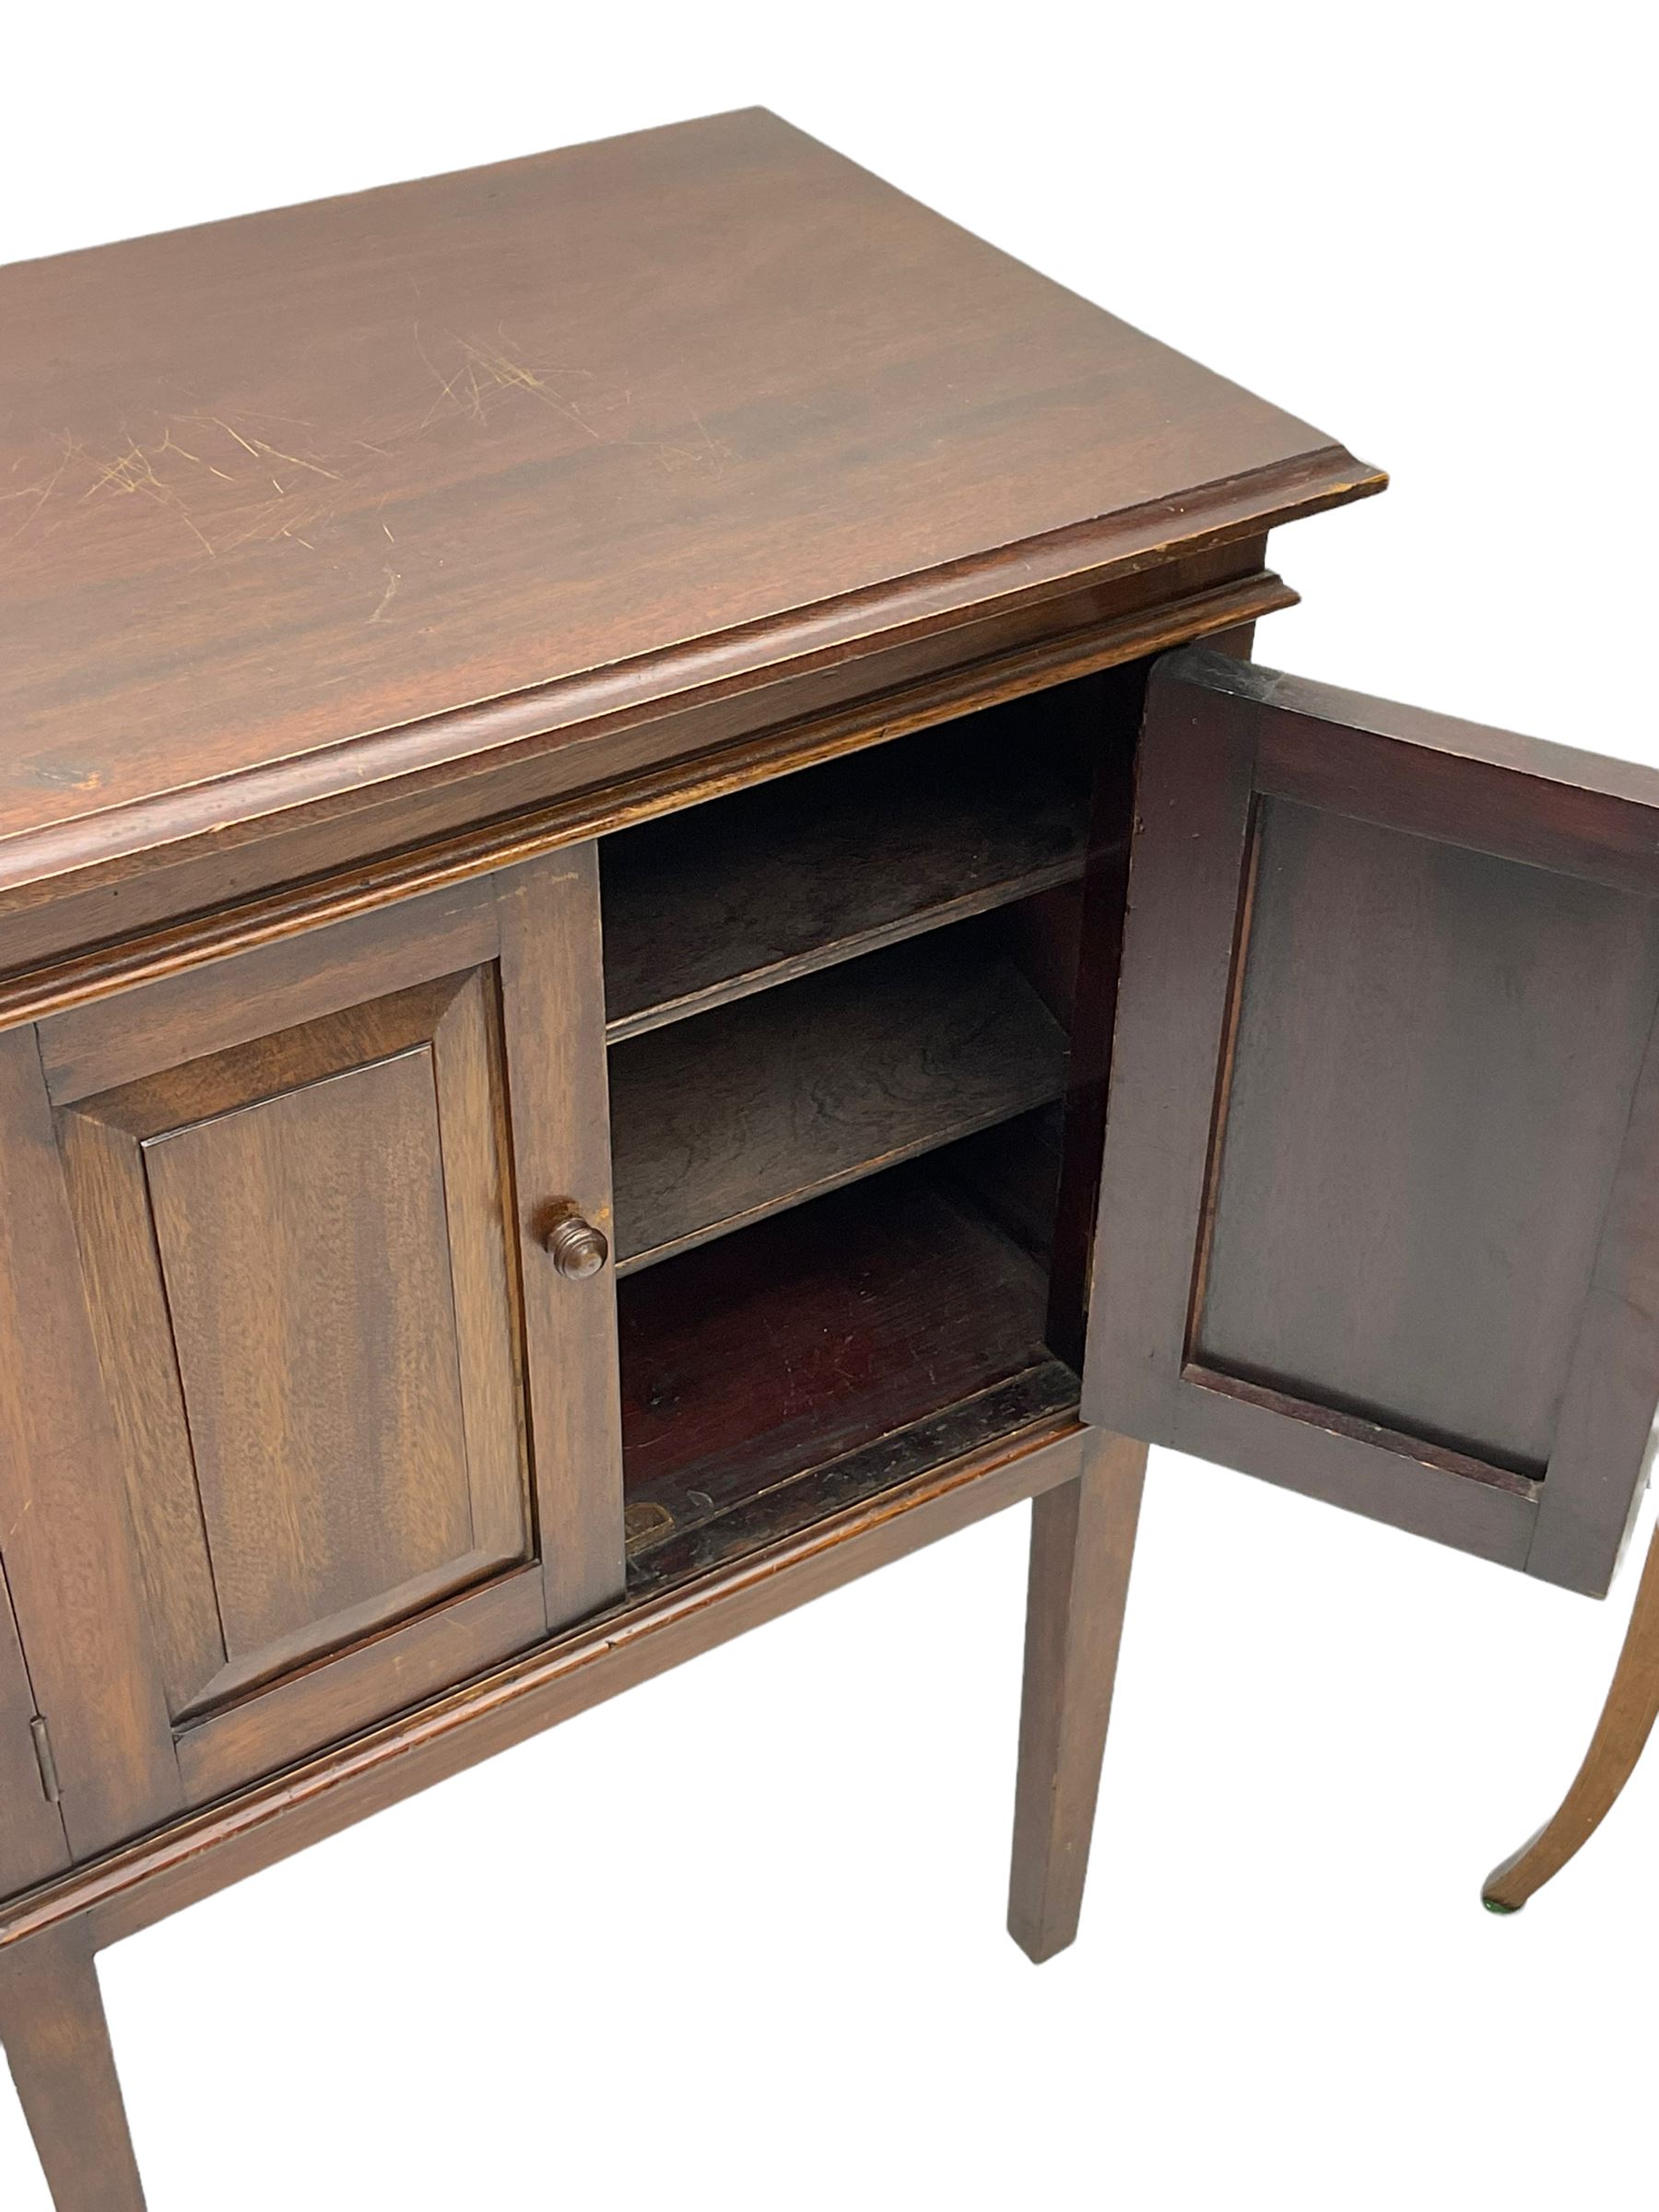 20th century mahogany two door cupboard/music cabinet and an early 20th century inlaid drop leaf cab - Image 3 of 3